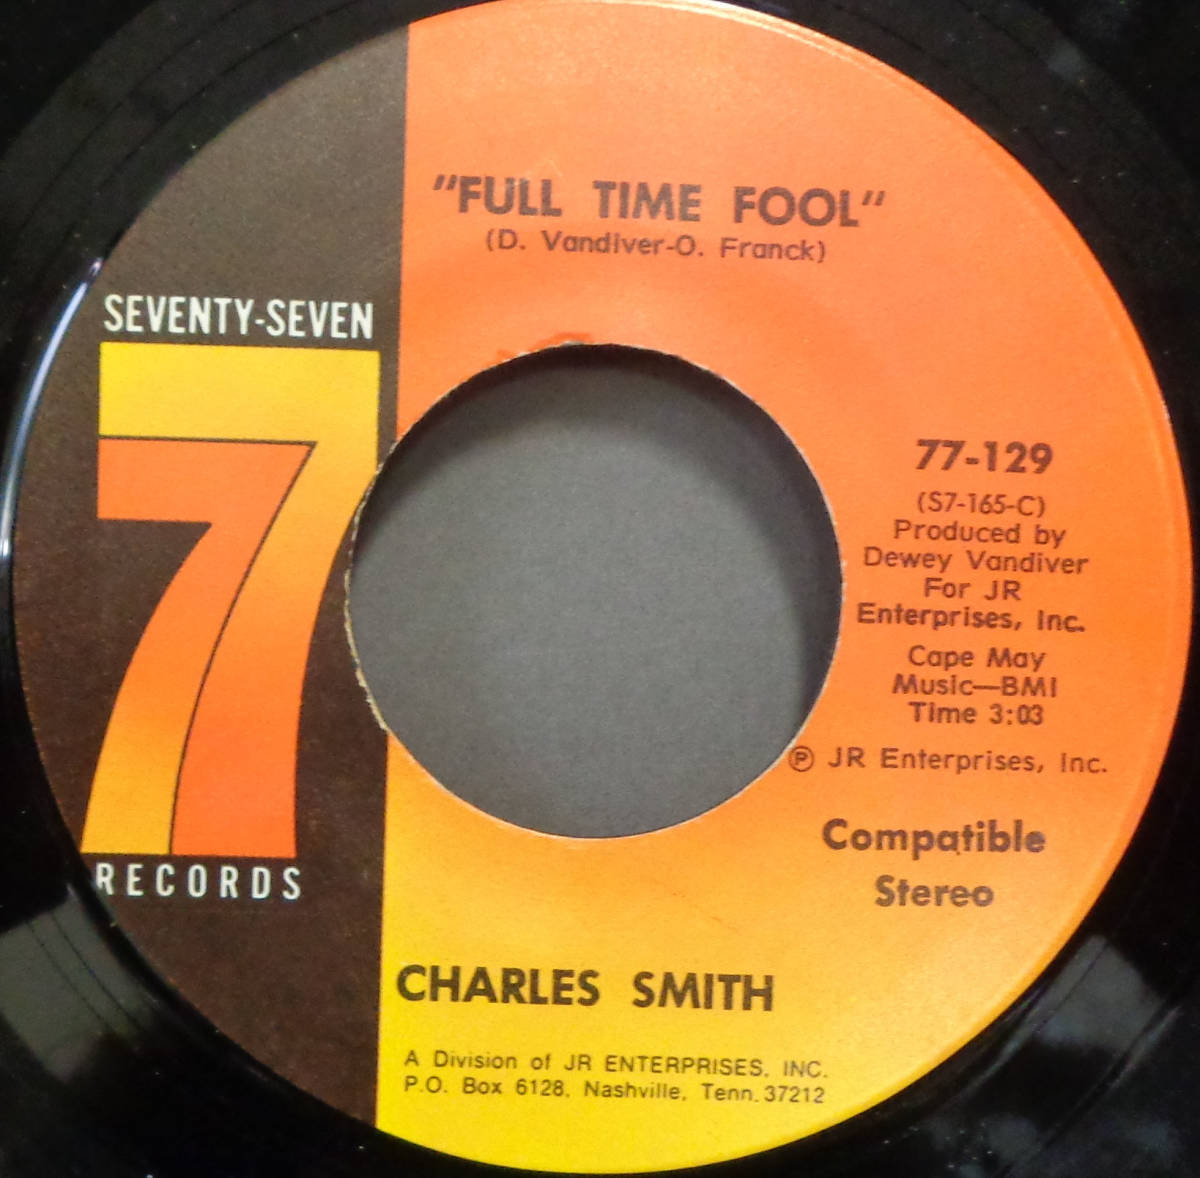 【SOUL 45】CHARLES SMITH - FULL TIME FOOL / I WANT TO LOVE YOU (s231015042)の画像1